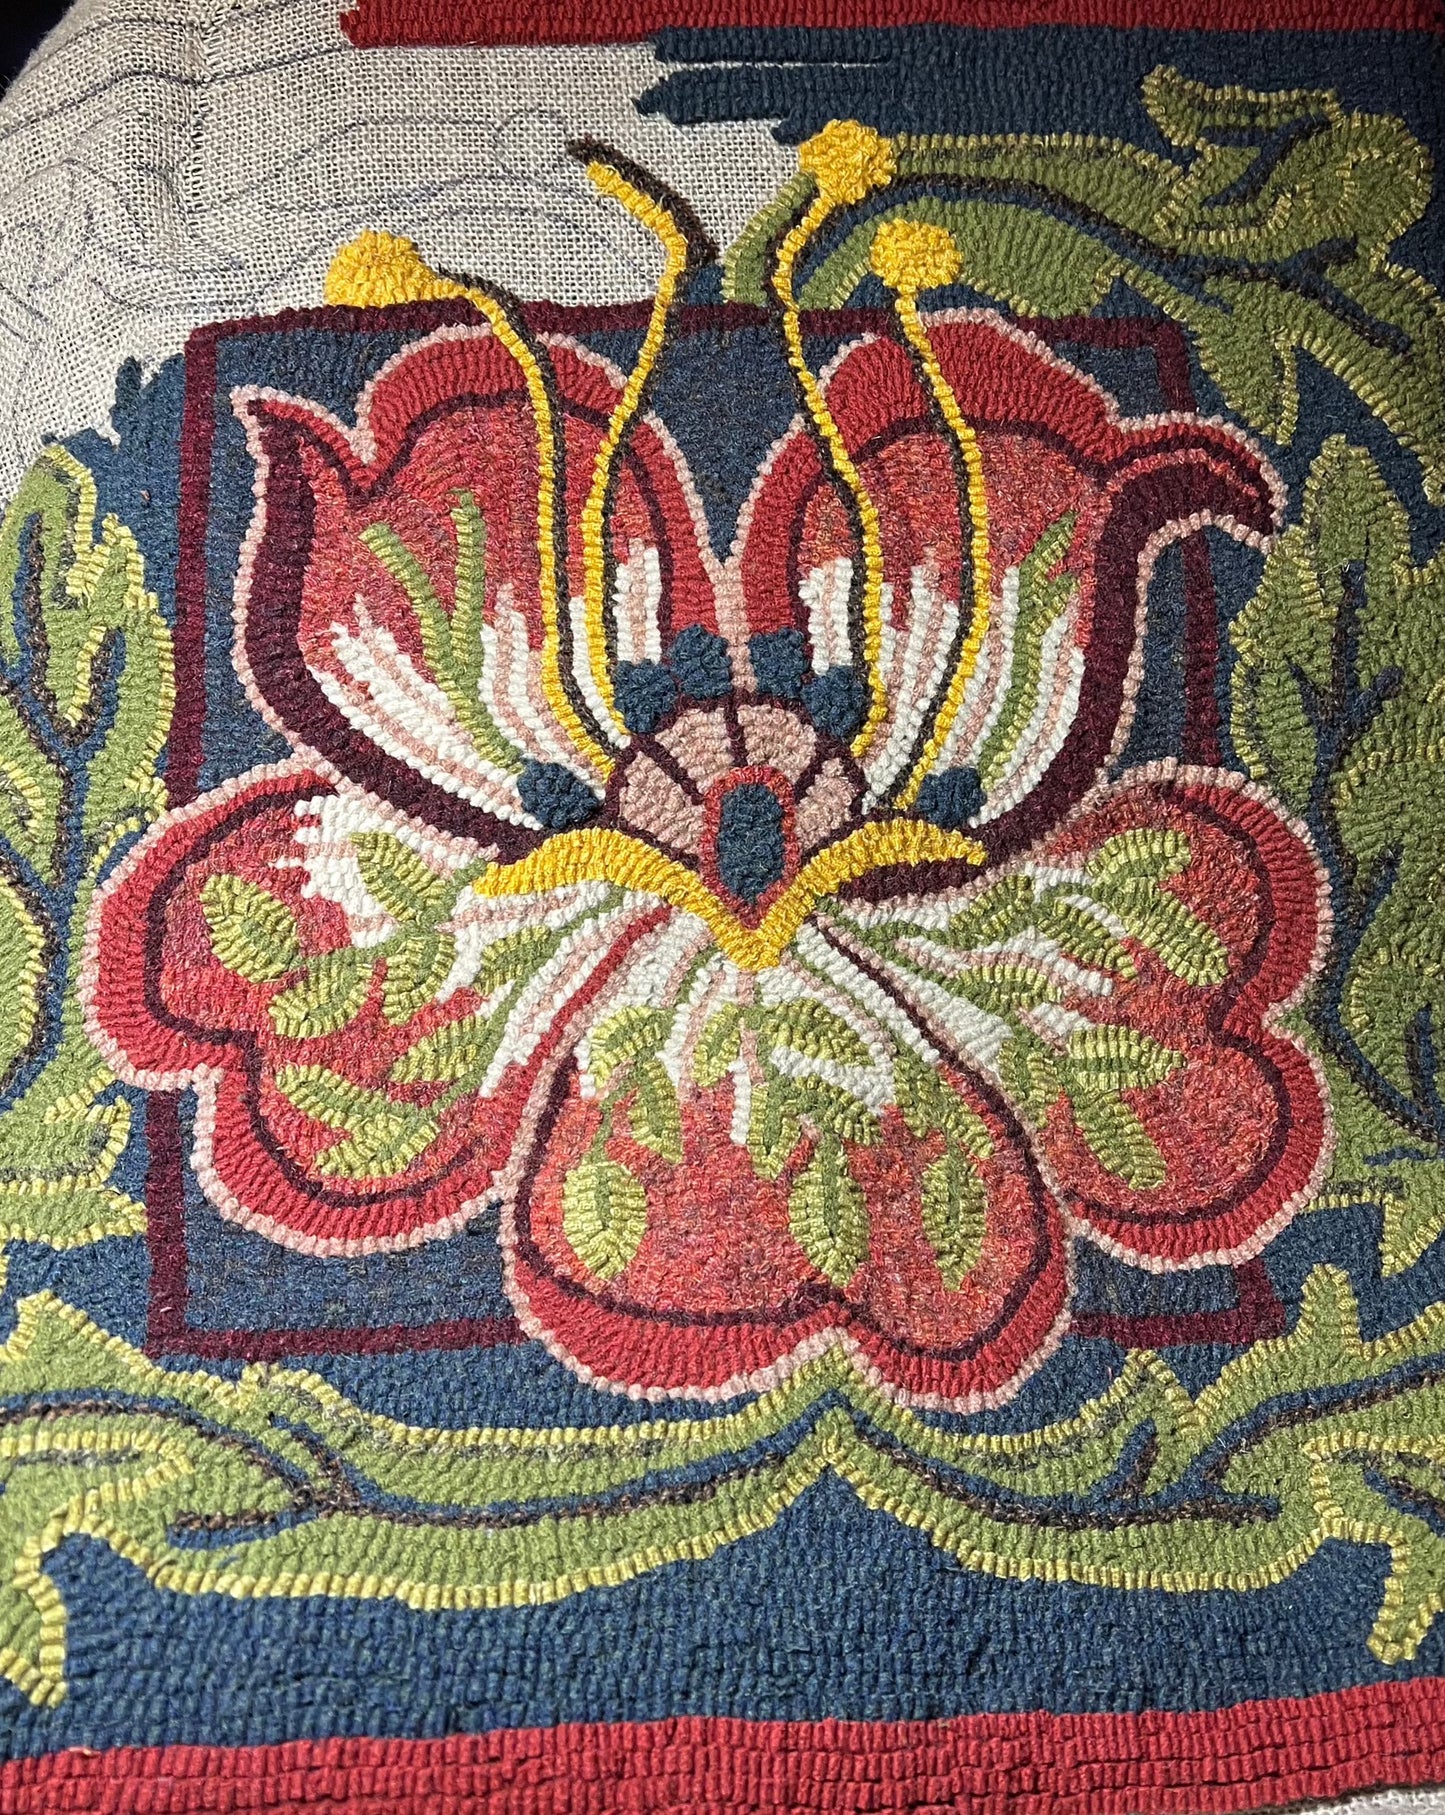 Arise-Rug Hooking Pattern on Linen, Floral Pattern, By Orphaned Wool